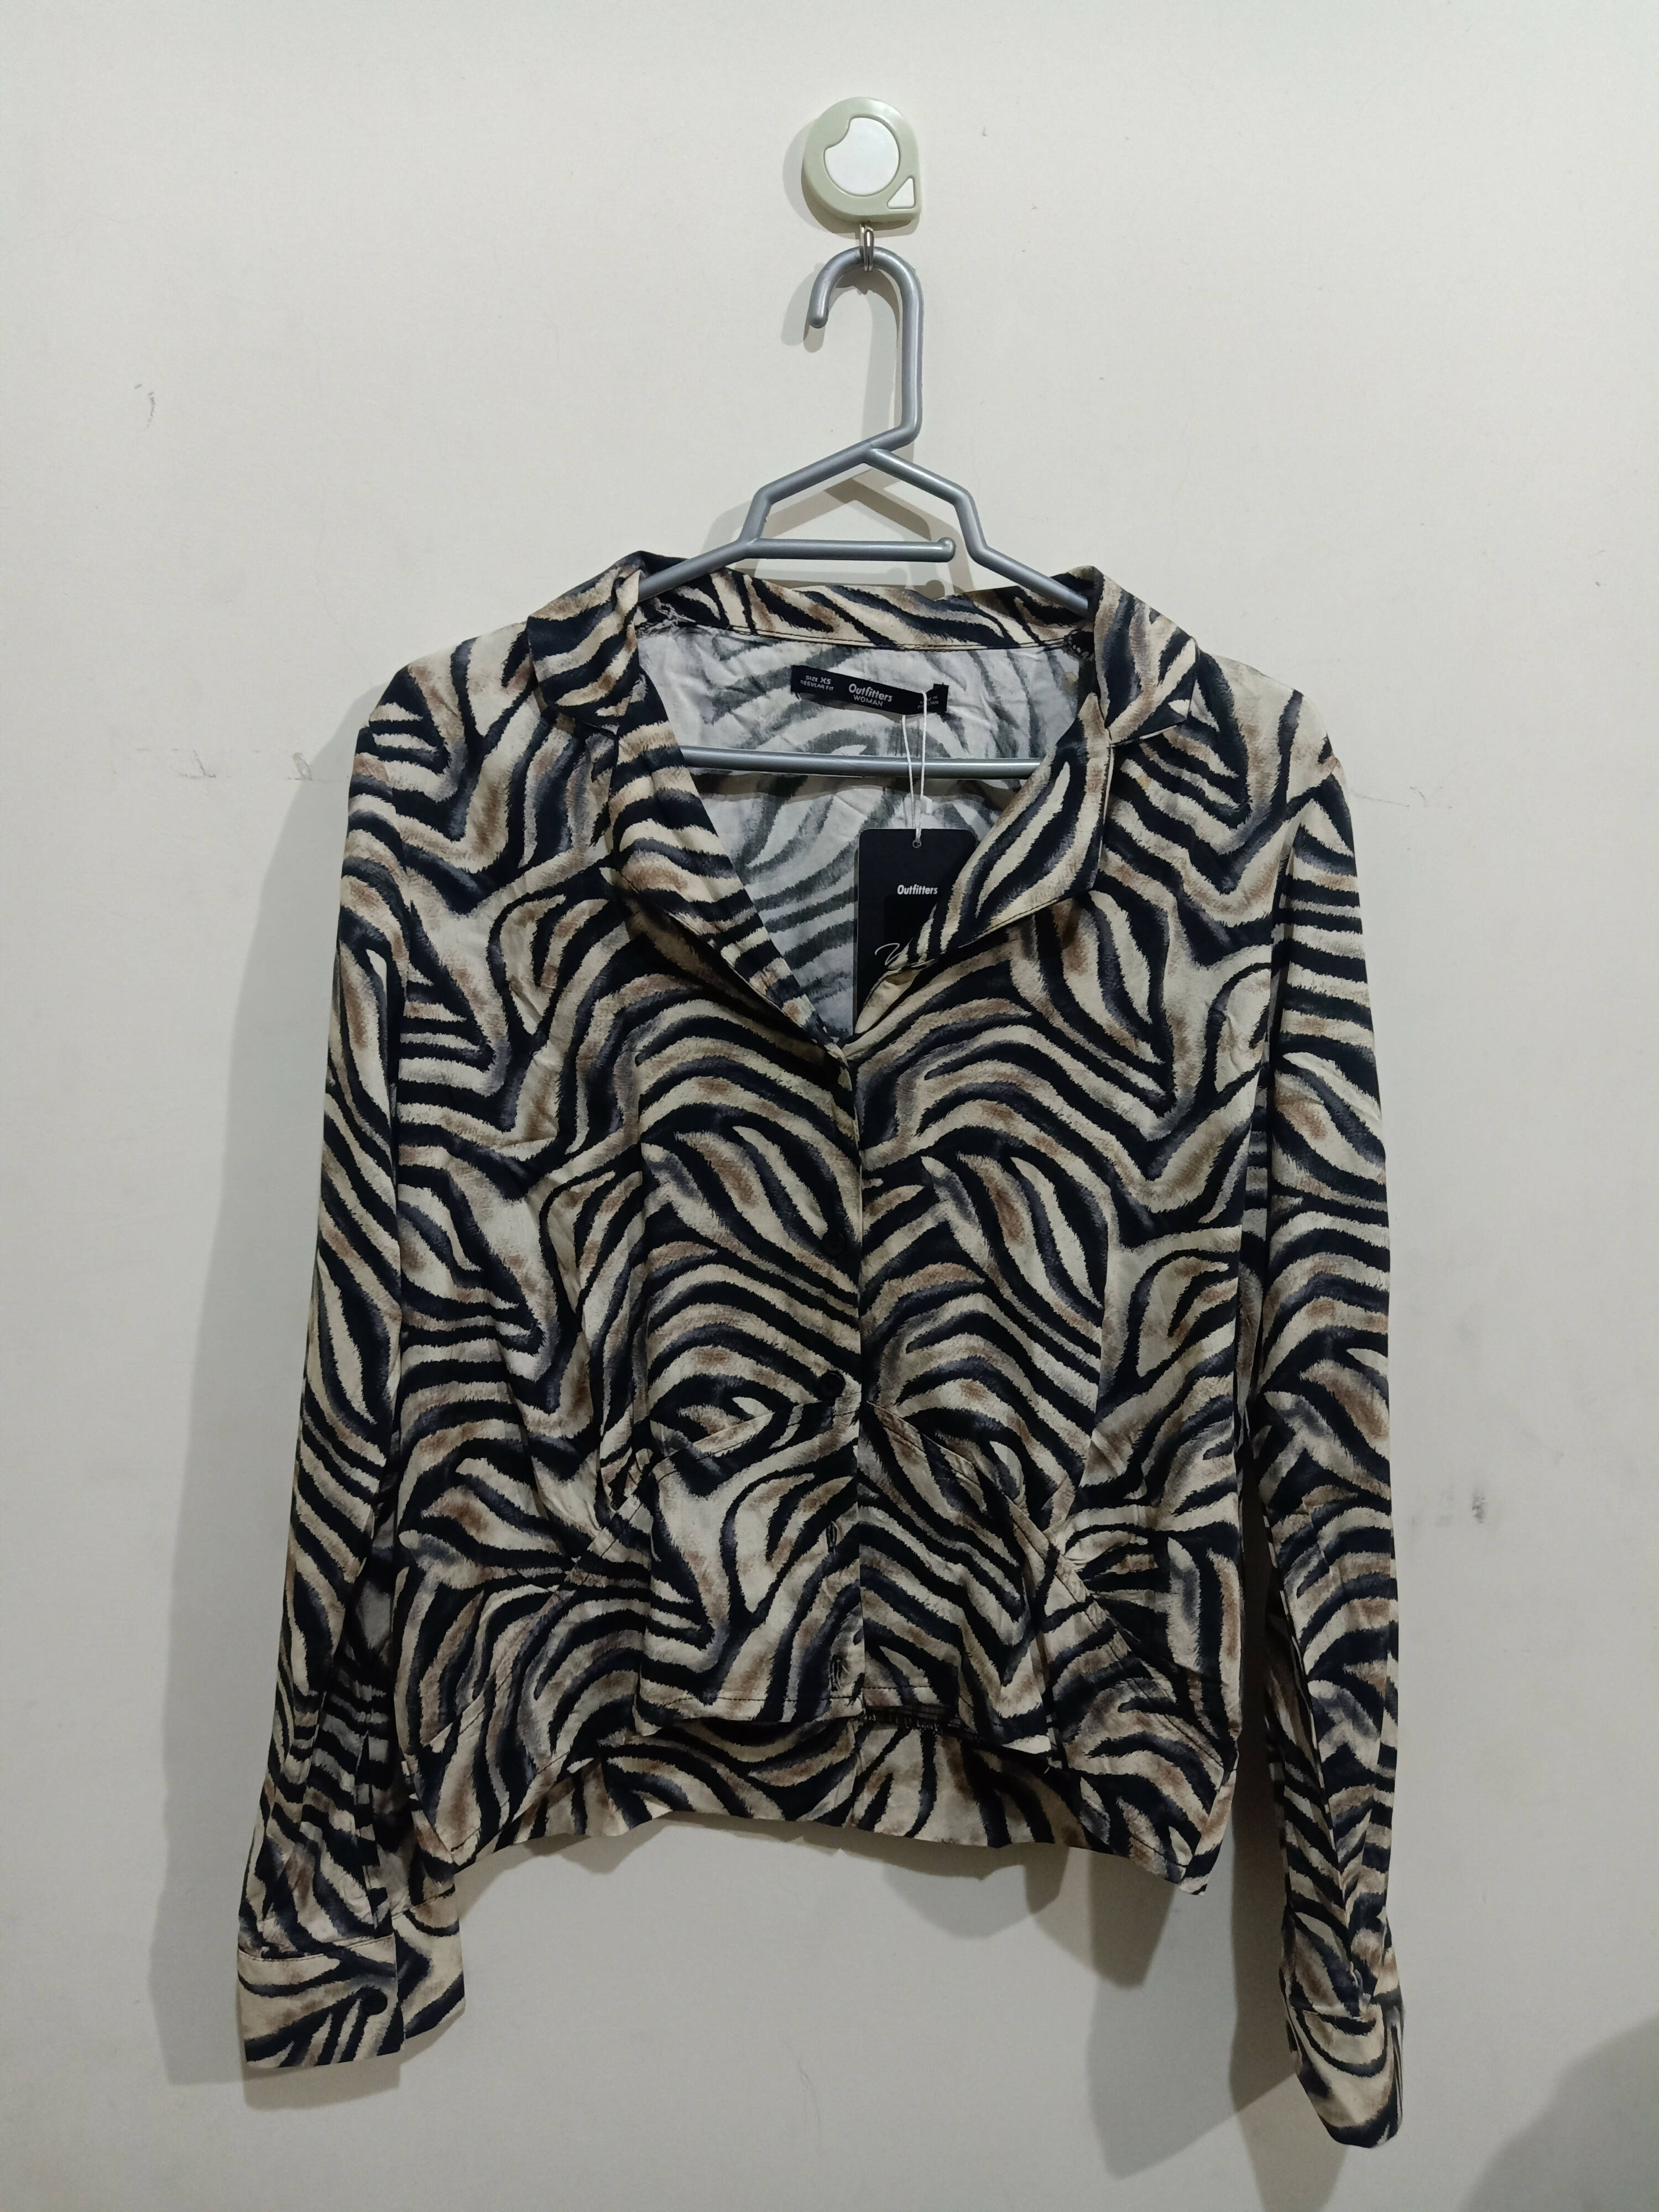 Outfitters | Zebra Printed Top | Women Tops & Shirts | Brand New With Tags